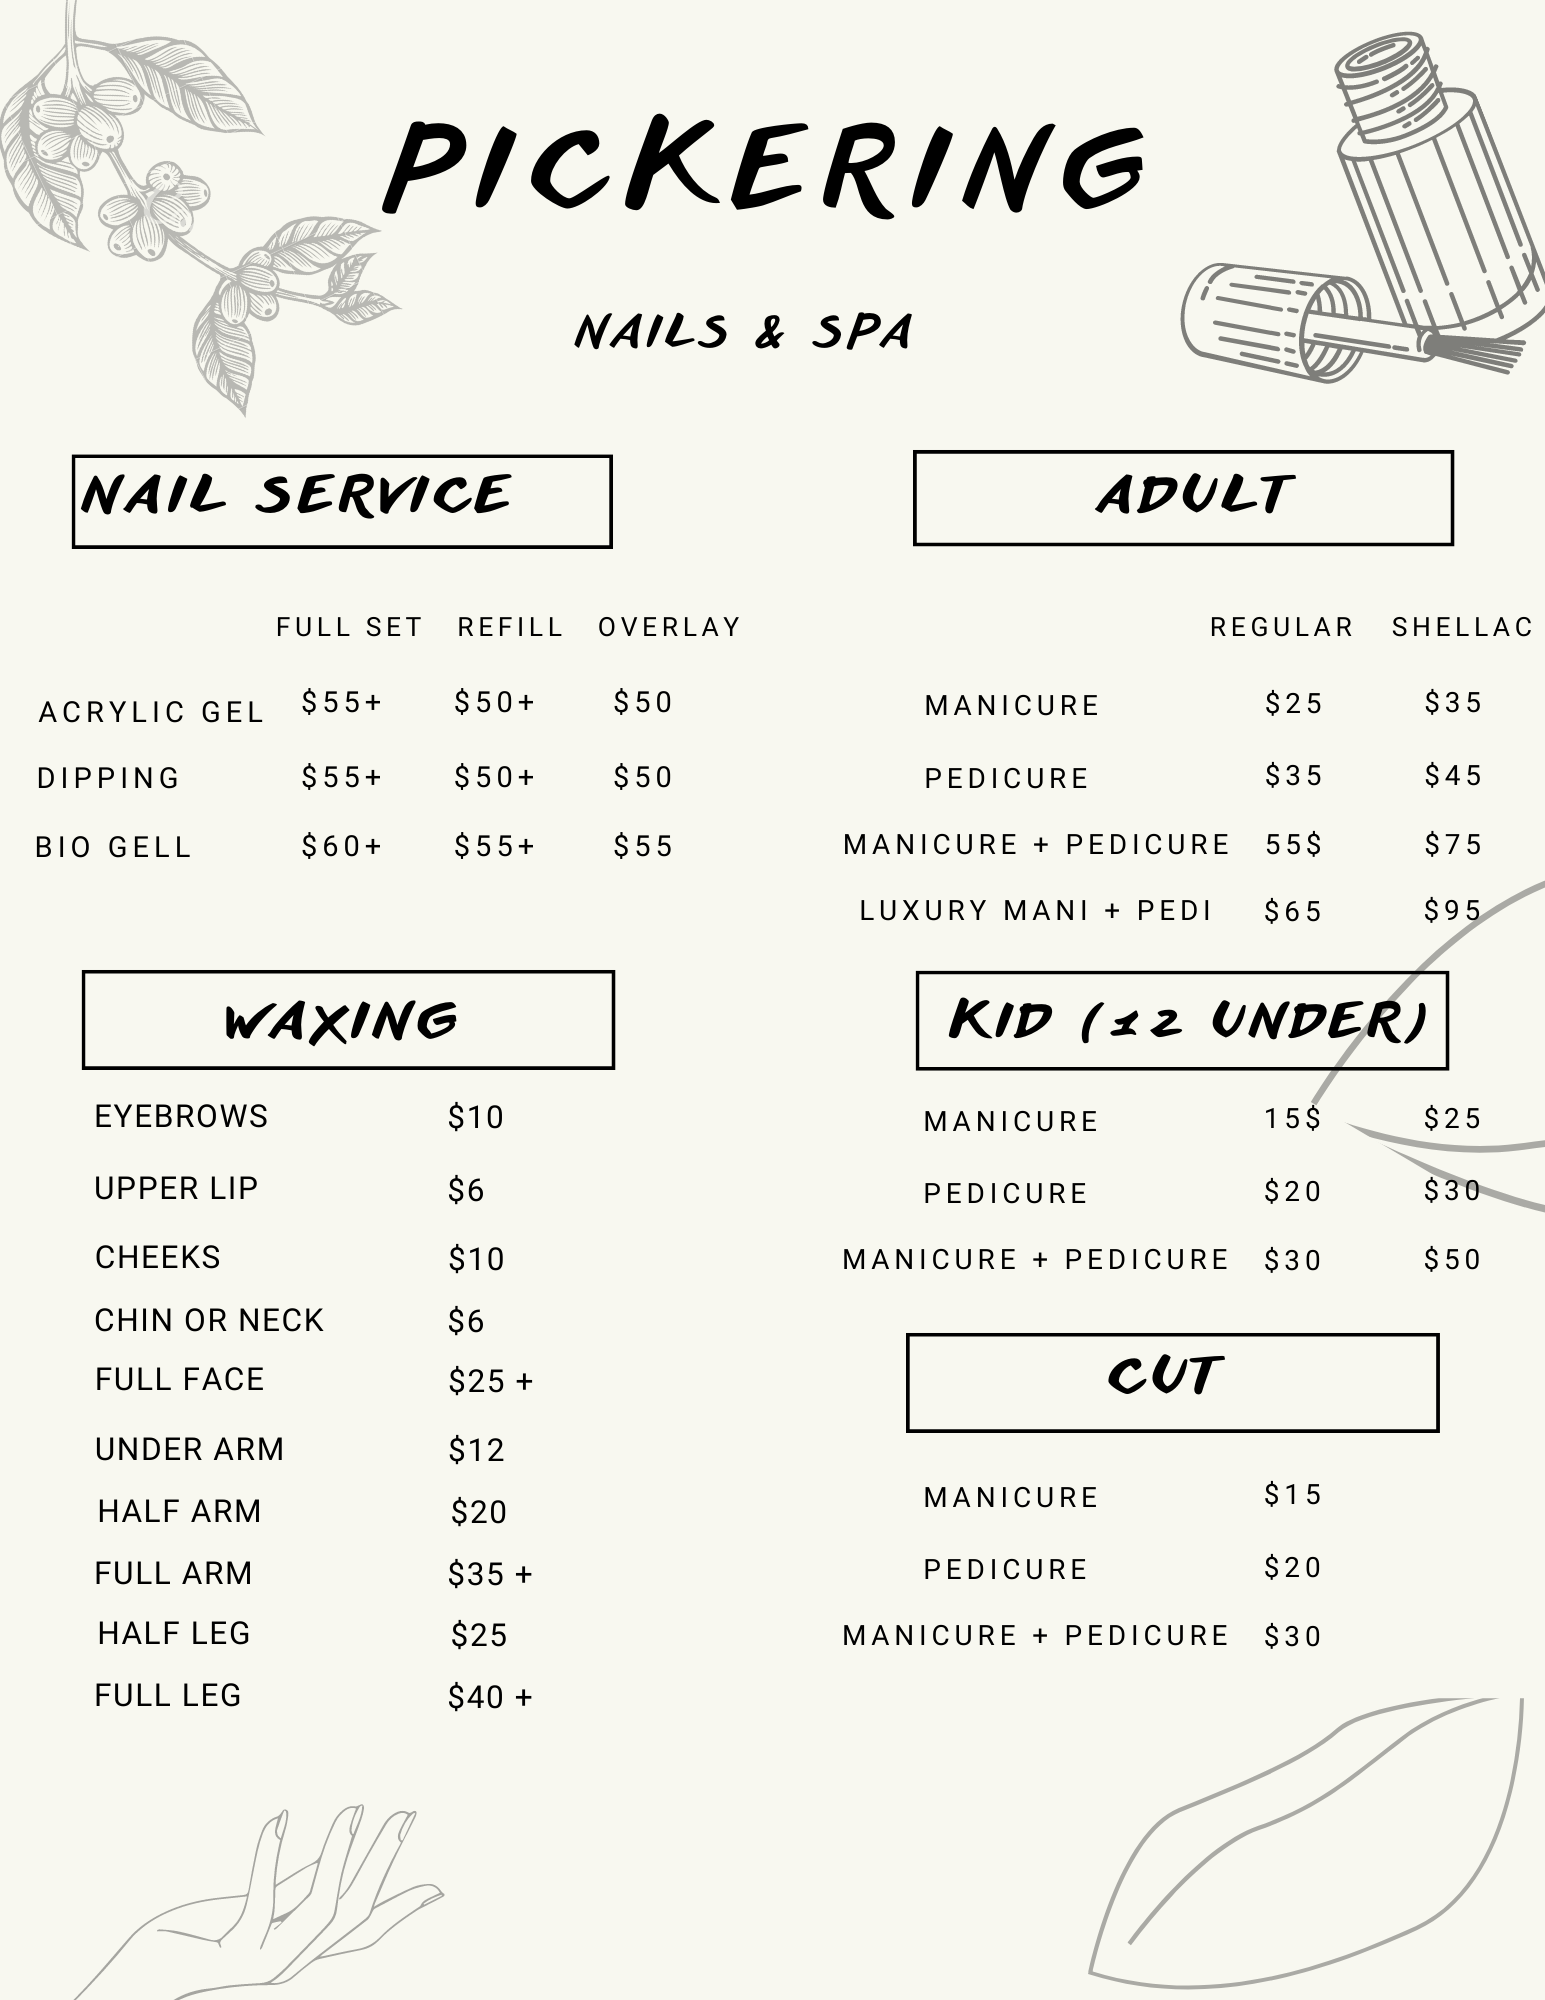 Menu for all services